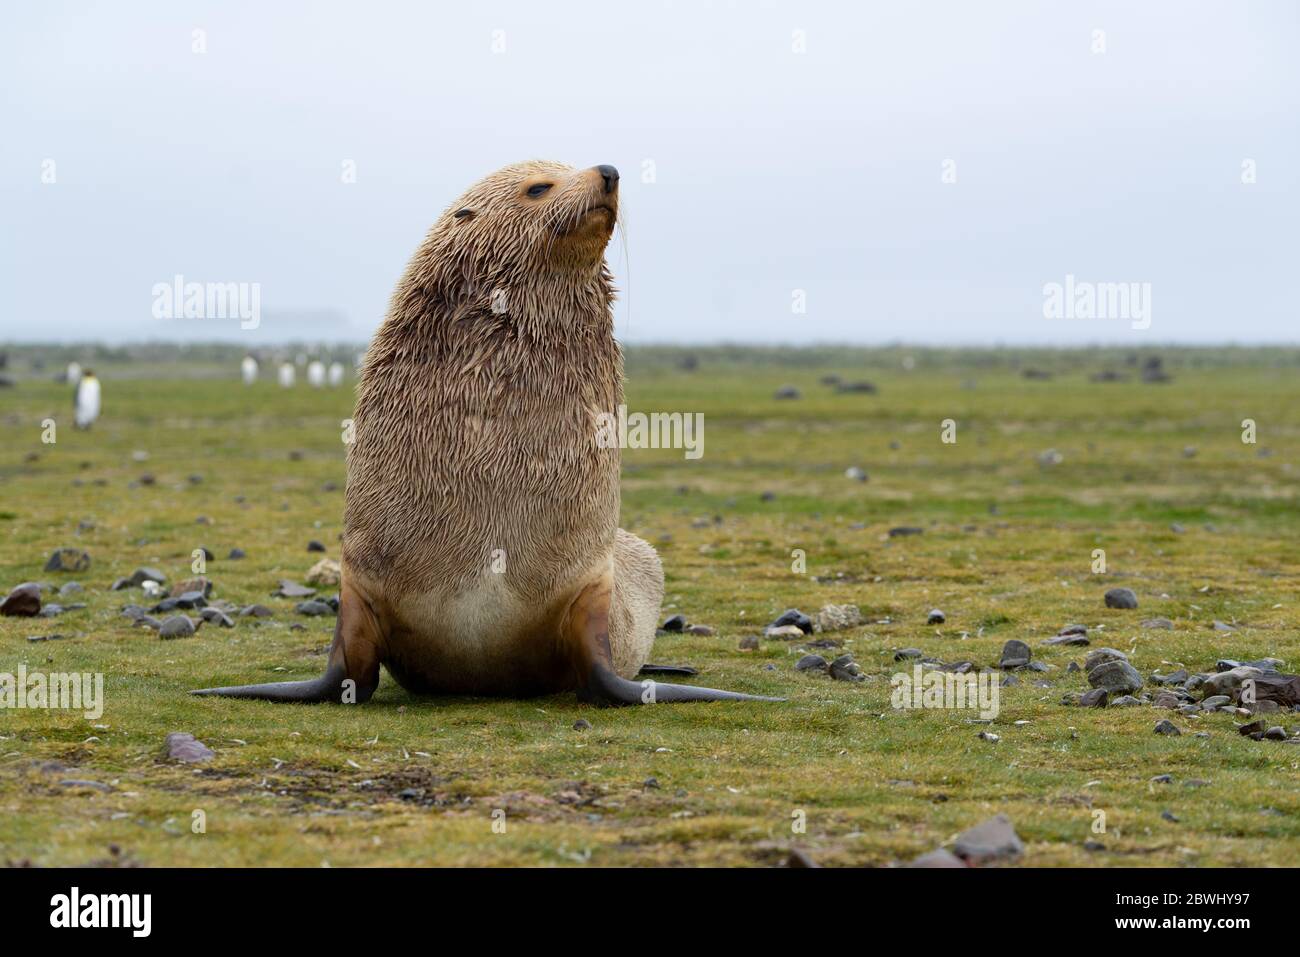 Big male fur seal sitting on the ground. It is a blond morph which is called 'leucism'. Only one out of 1000 fur seals is blonde. Grassland area at 'F Stock Photo